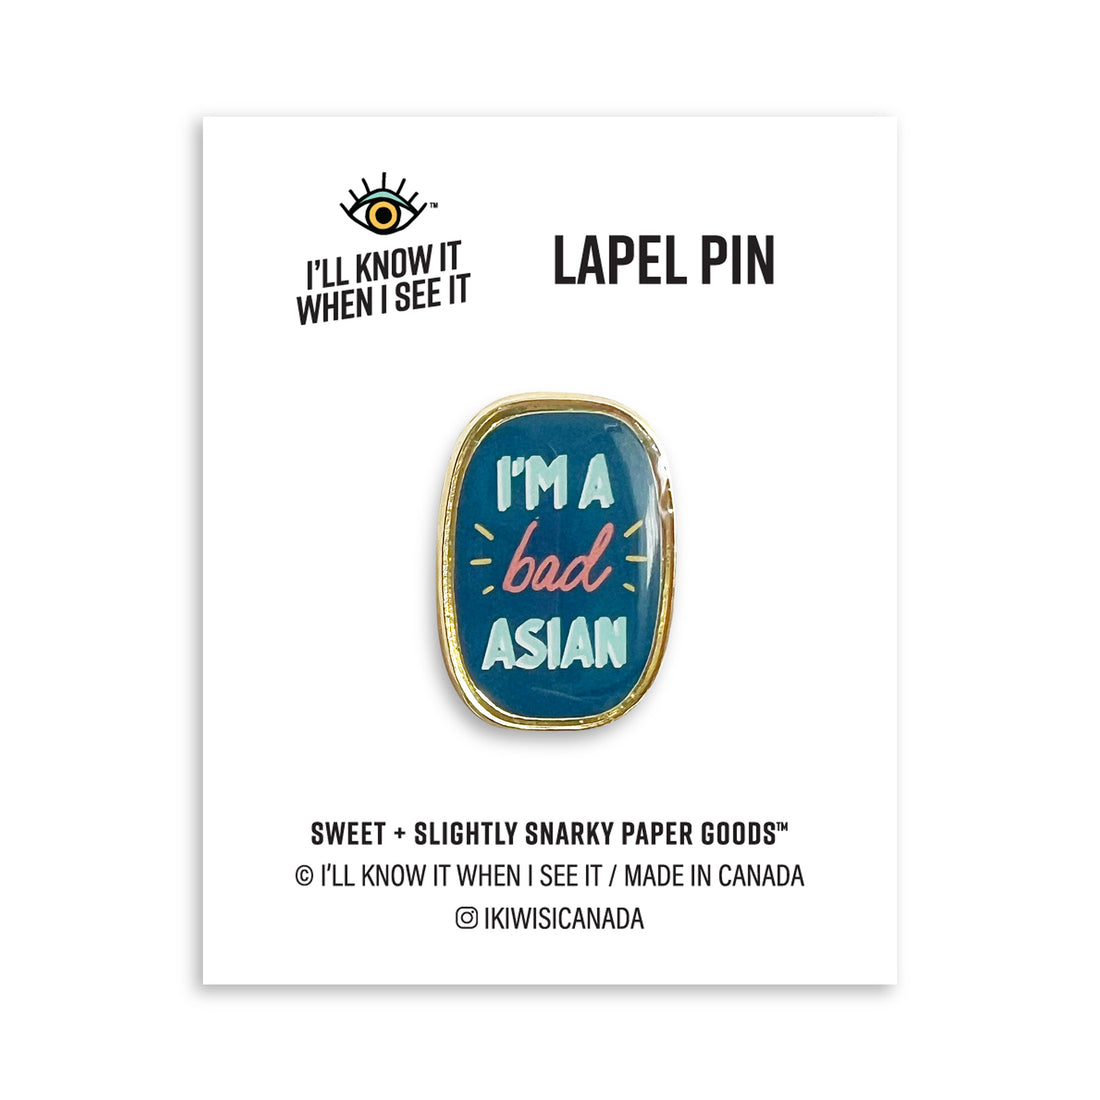 Im a bad Asian lapel pin by I&